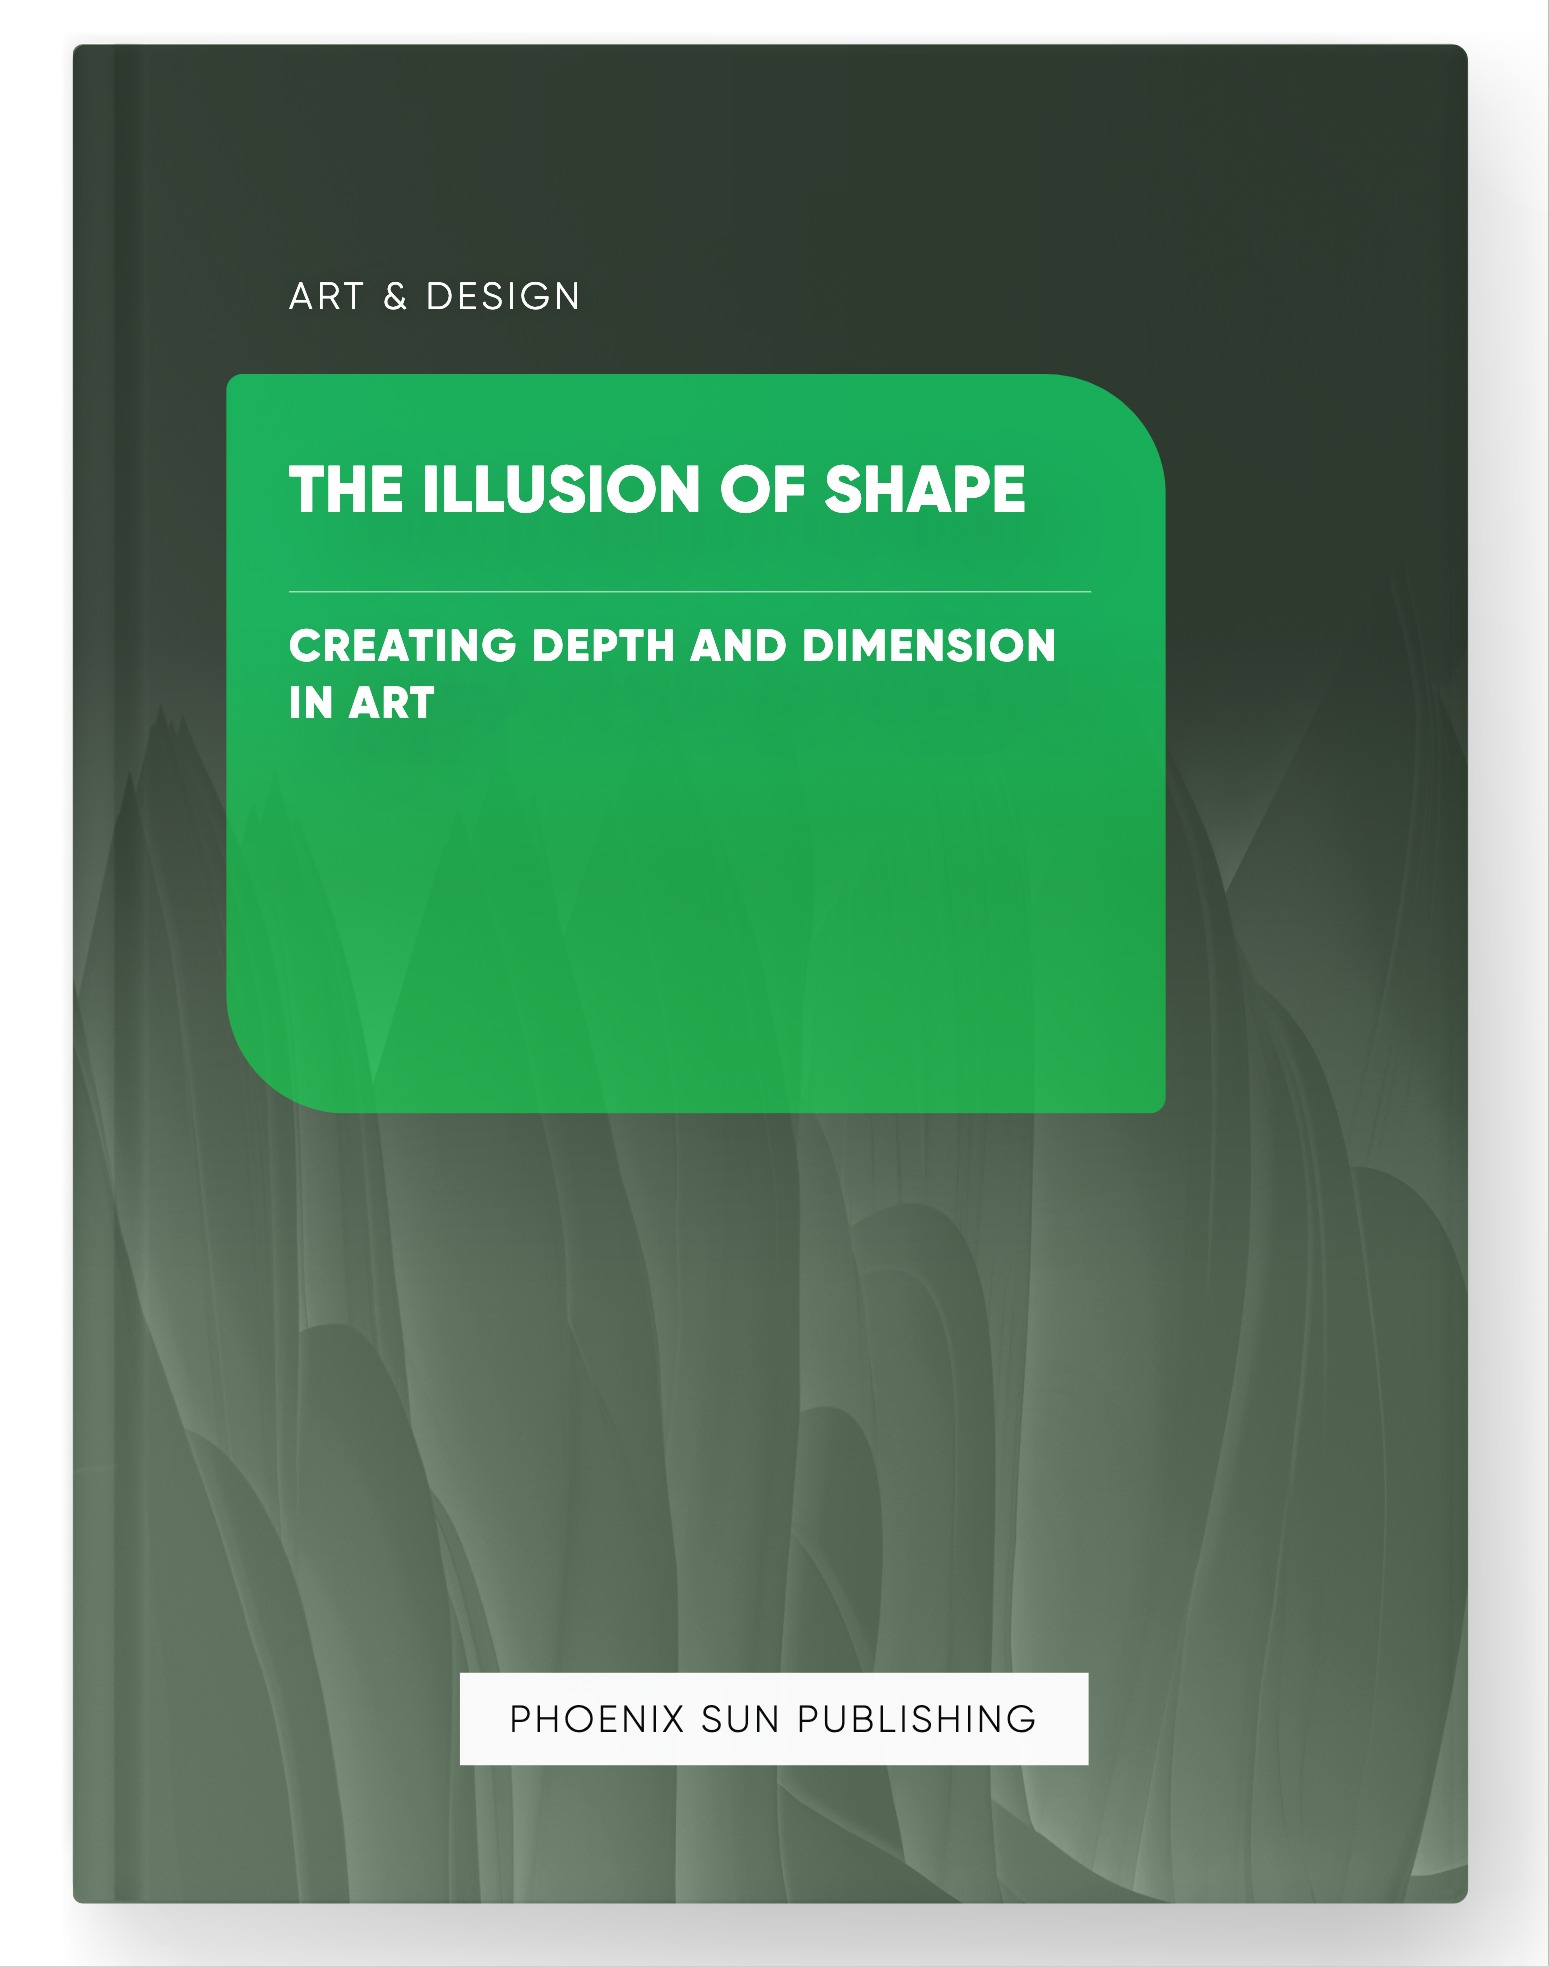 The Illusion of Shape – Creating Depth and Dimension in Art